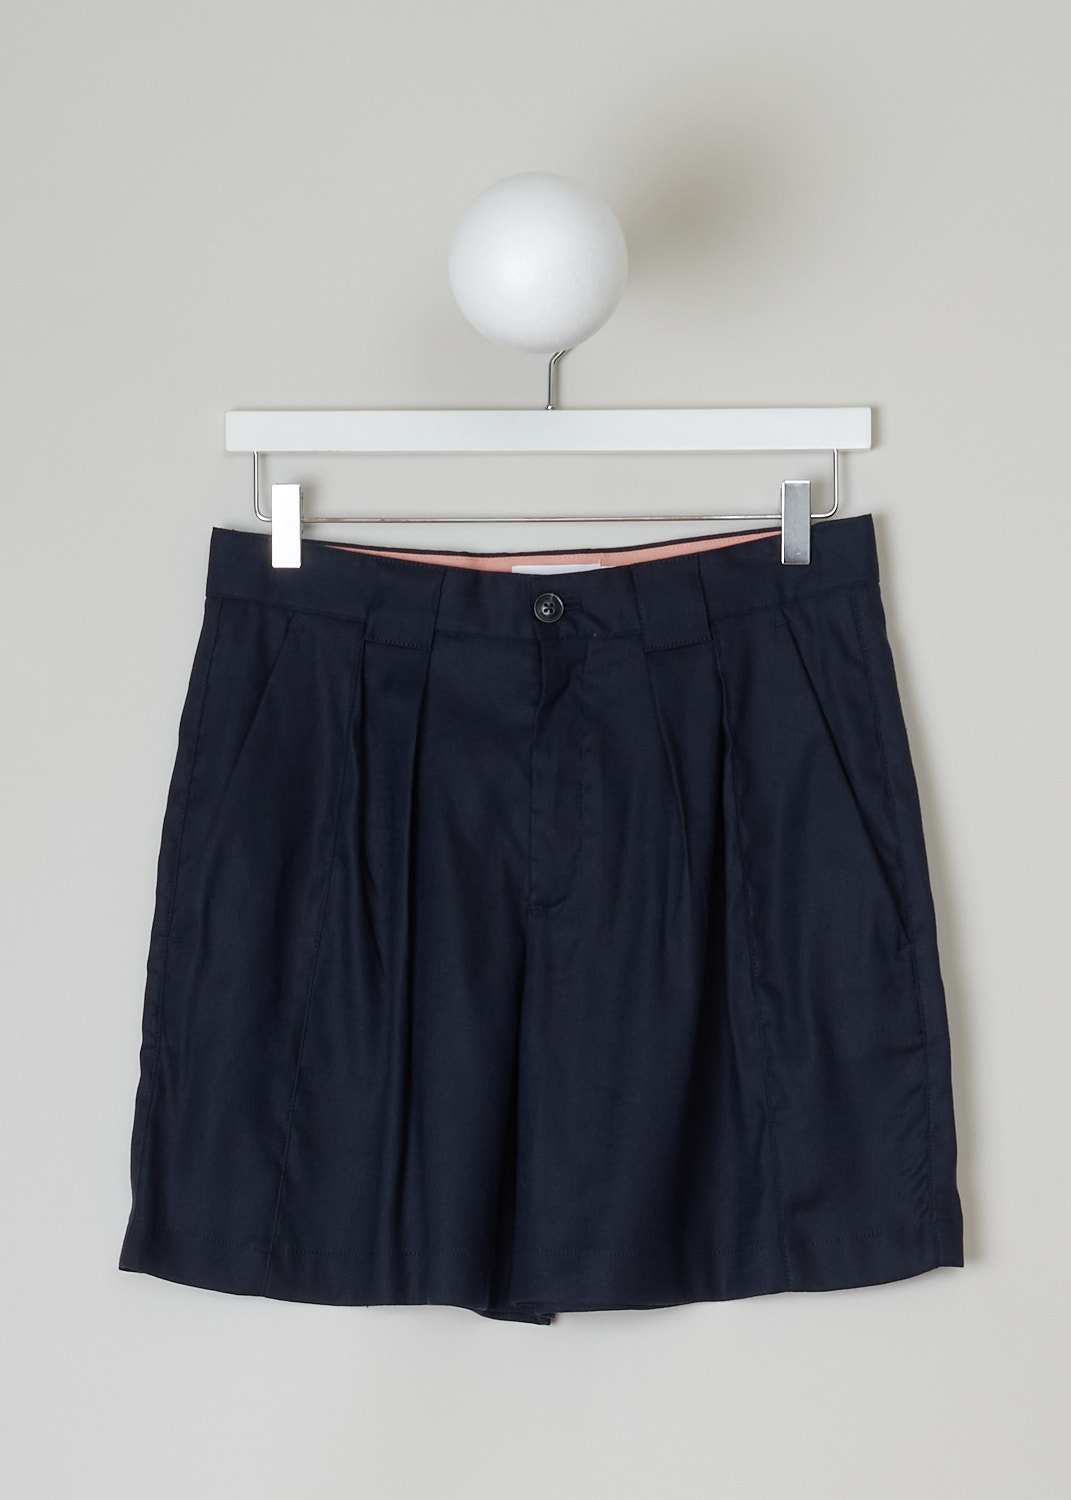 CLOSED, NAVY BLUE LINEN SHORTS, JOON_C92051_32L_22_561, Blue, Front, These high-waisted navy blue linen shorts have a waistband with belt loops and a button and zipper closure. Subtle knife pleats decorate the front. These shorts have slanted pockets in the front and a single buttoned patch pocket in the back. 
